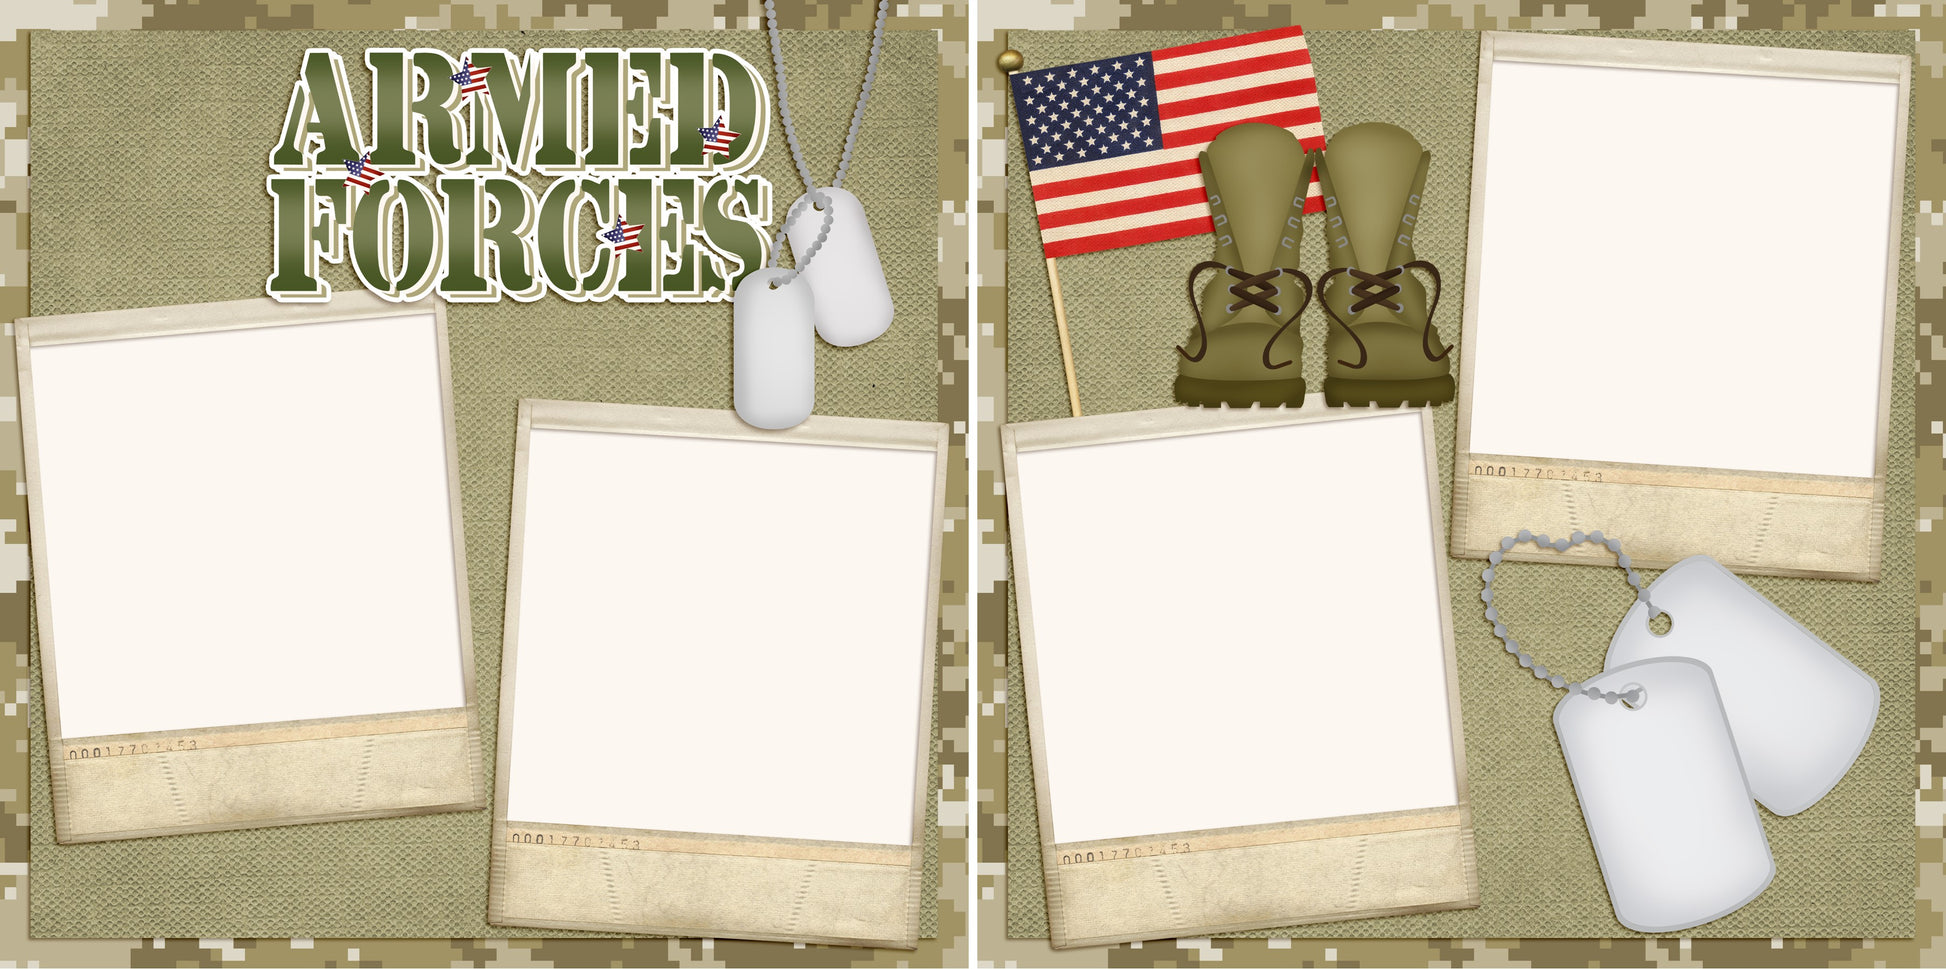 Armed Forces - 4876 - EZscrapbooks Scrapbook Layouts Military